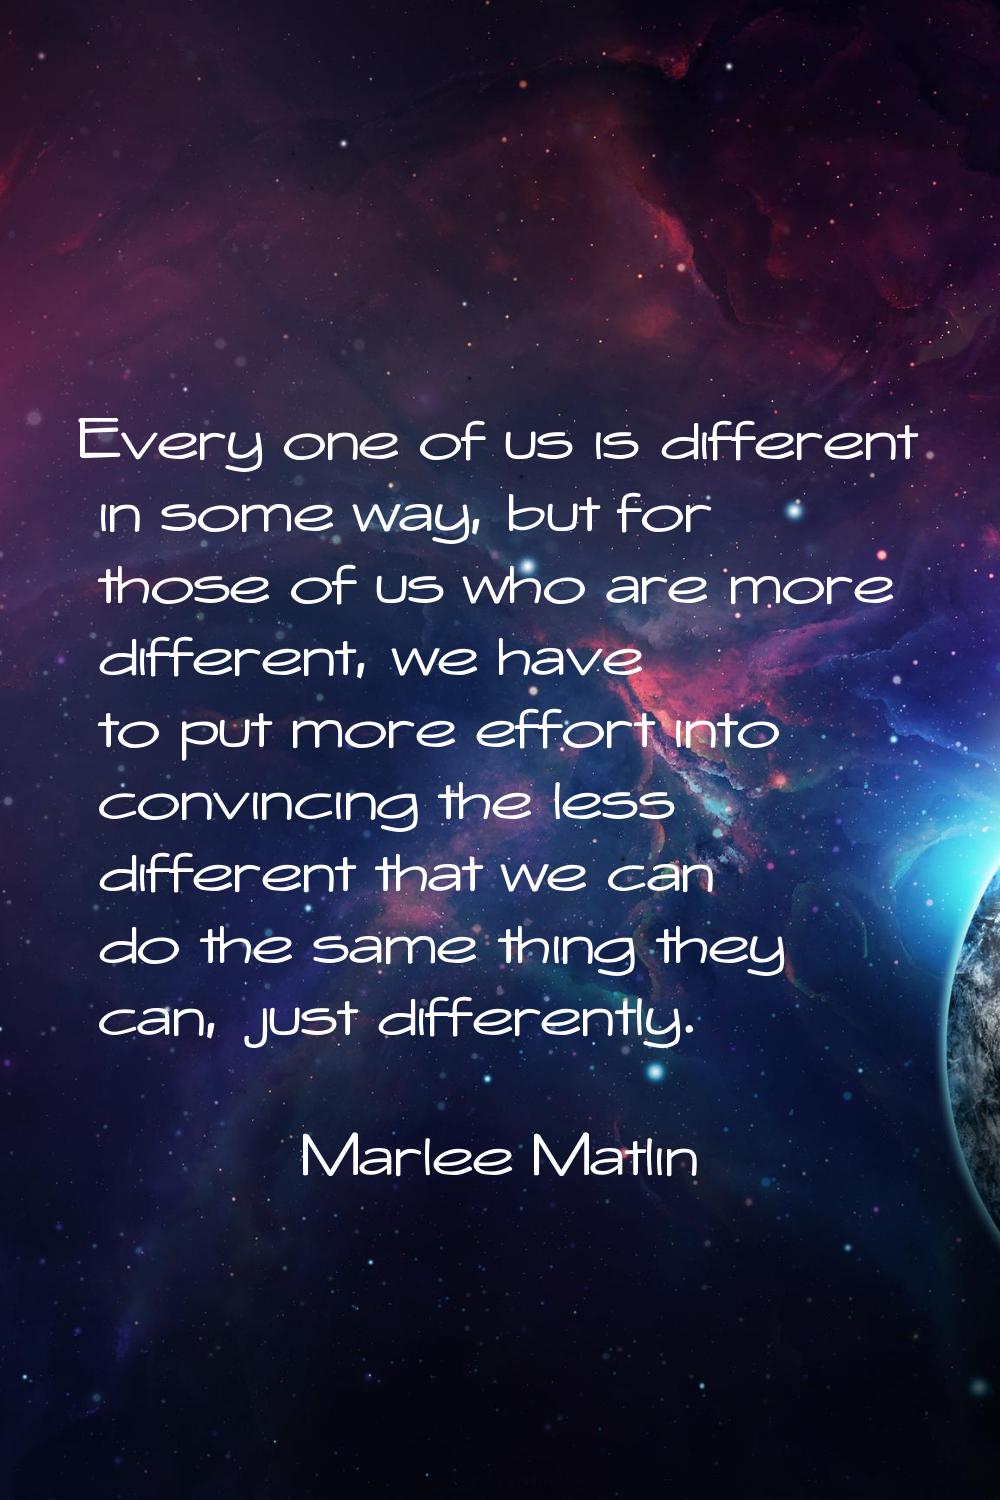 Every one of us is different in some way, but for those of us who are more different, we have to pu